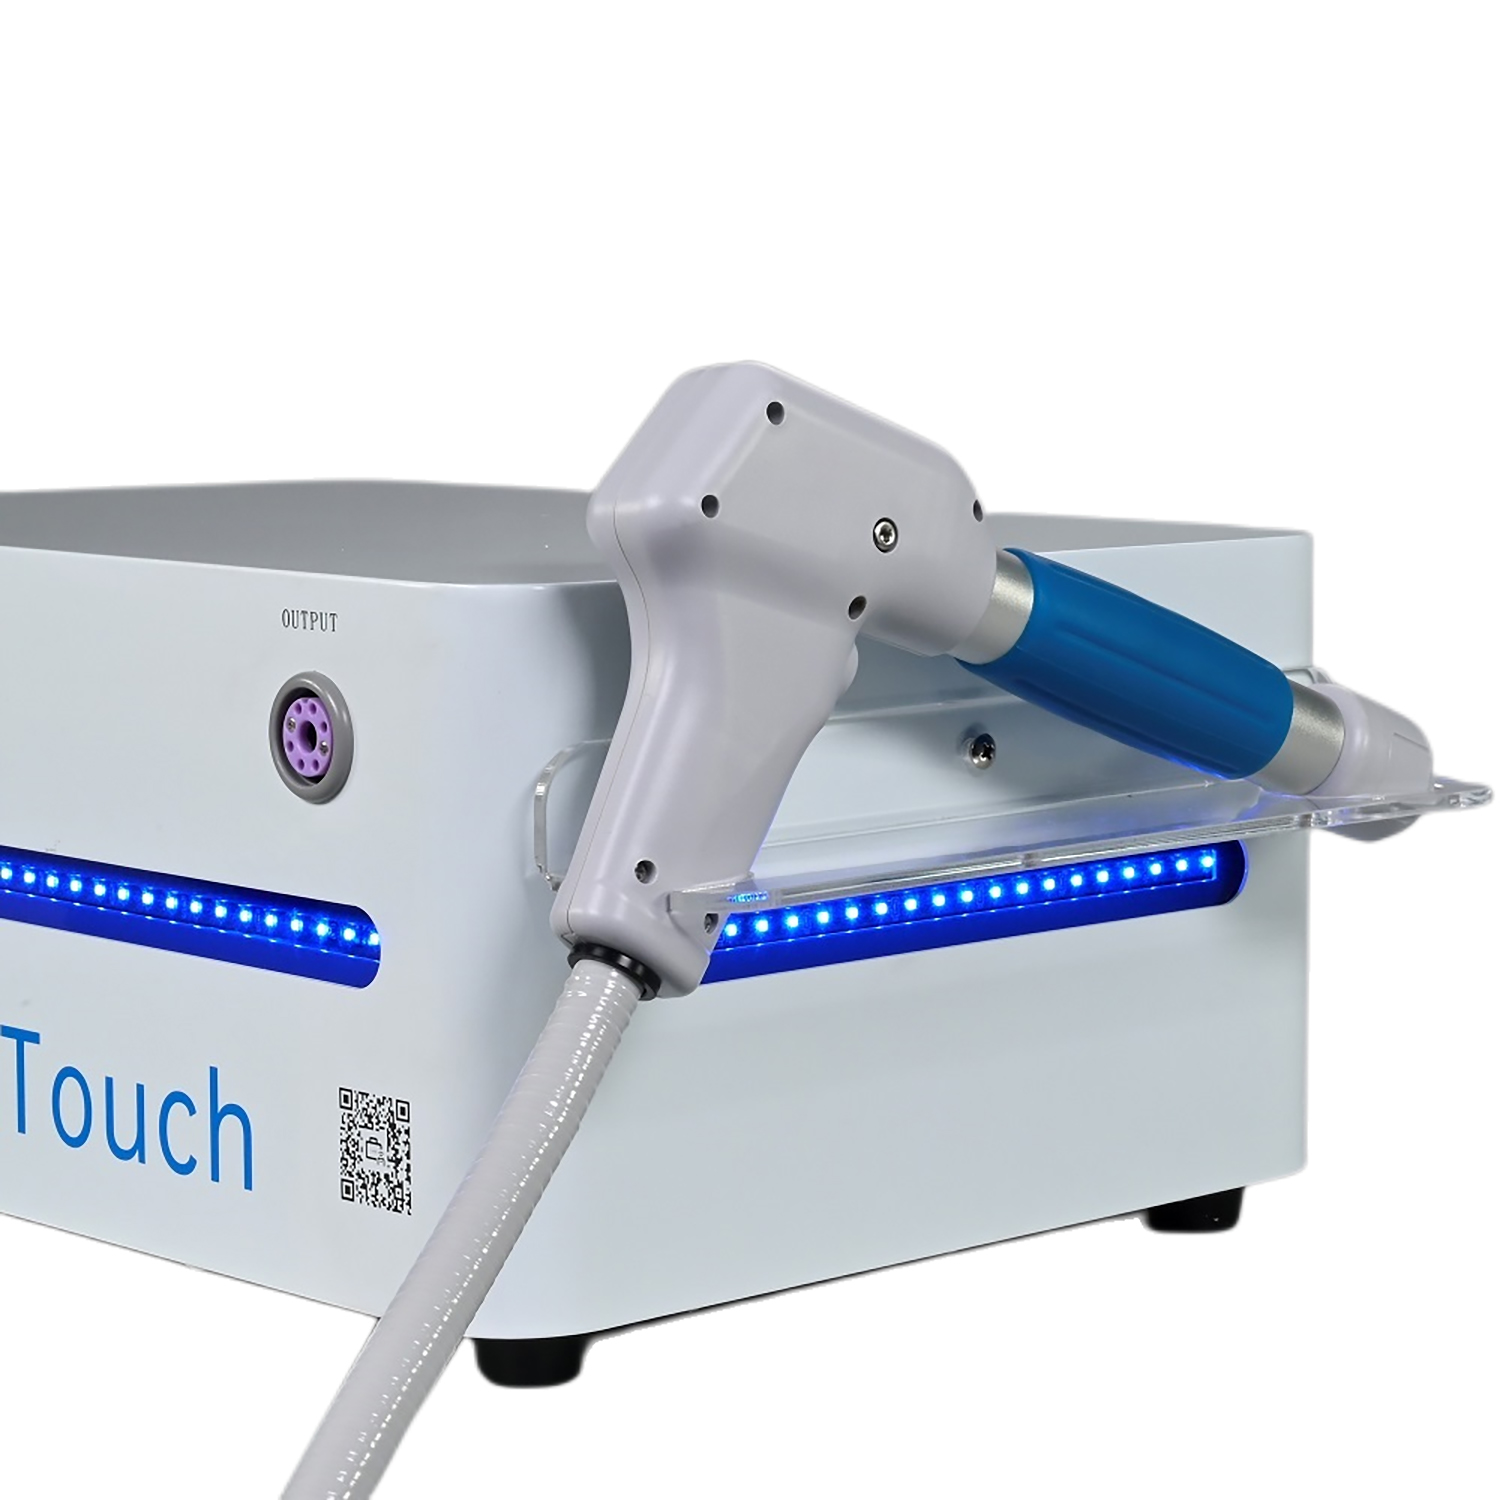 CTLNHA Shockwave Therapy Machine, Electromagnetic Shock Wave Machine  Extracorporeal Radial Shock Wav…See more CTLNHA Shockwave Therapy Machine